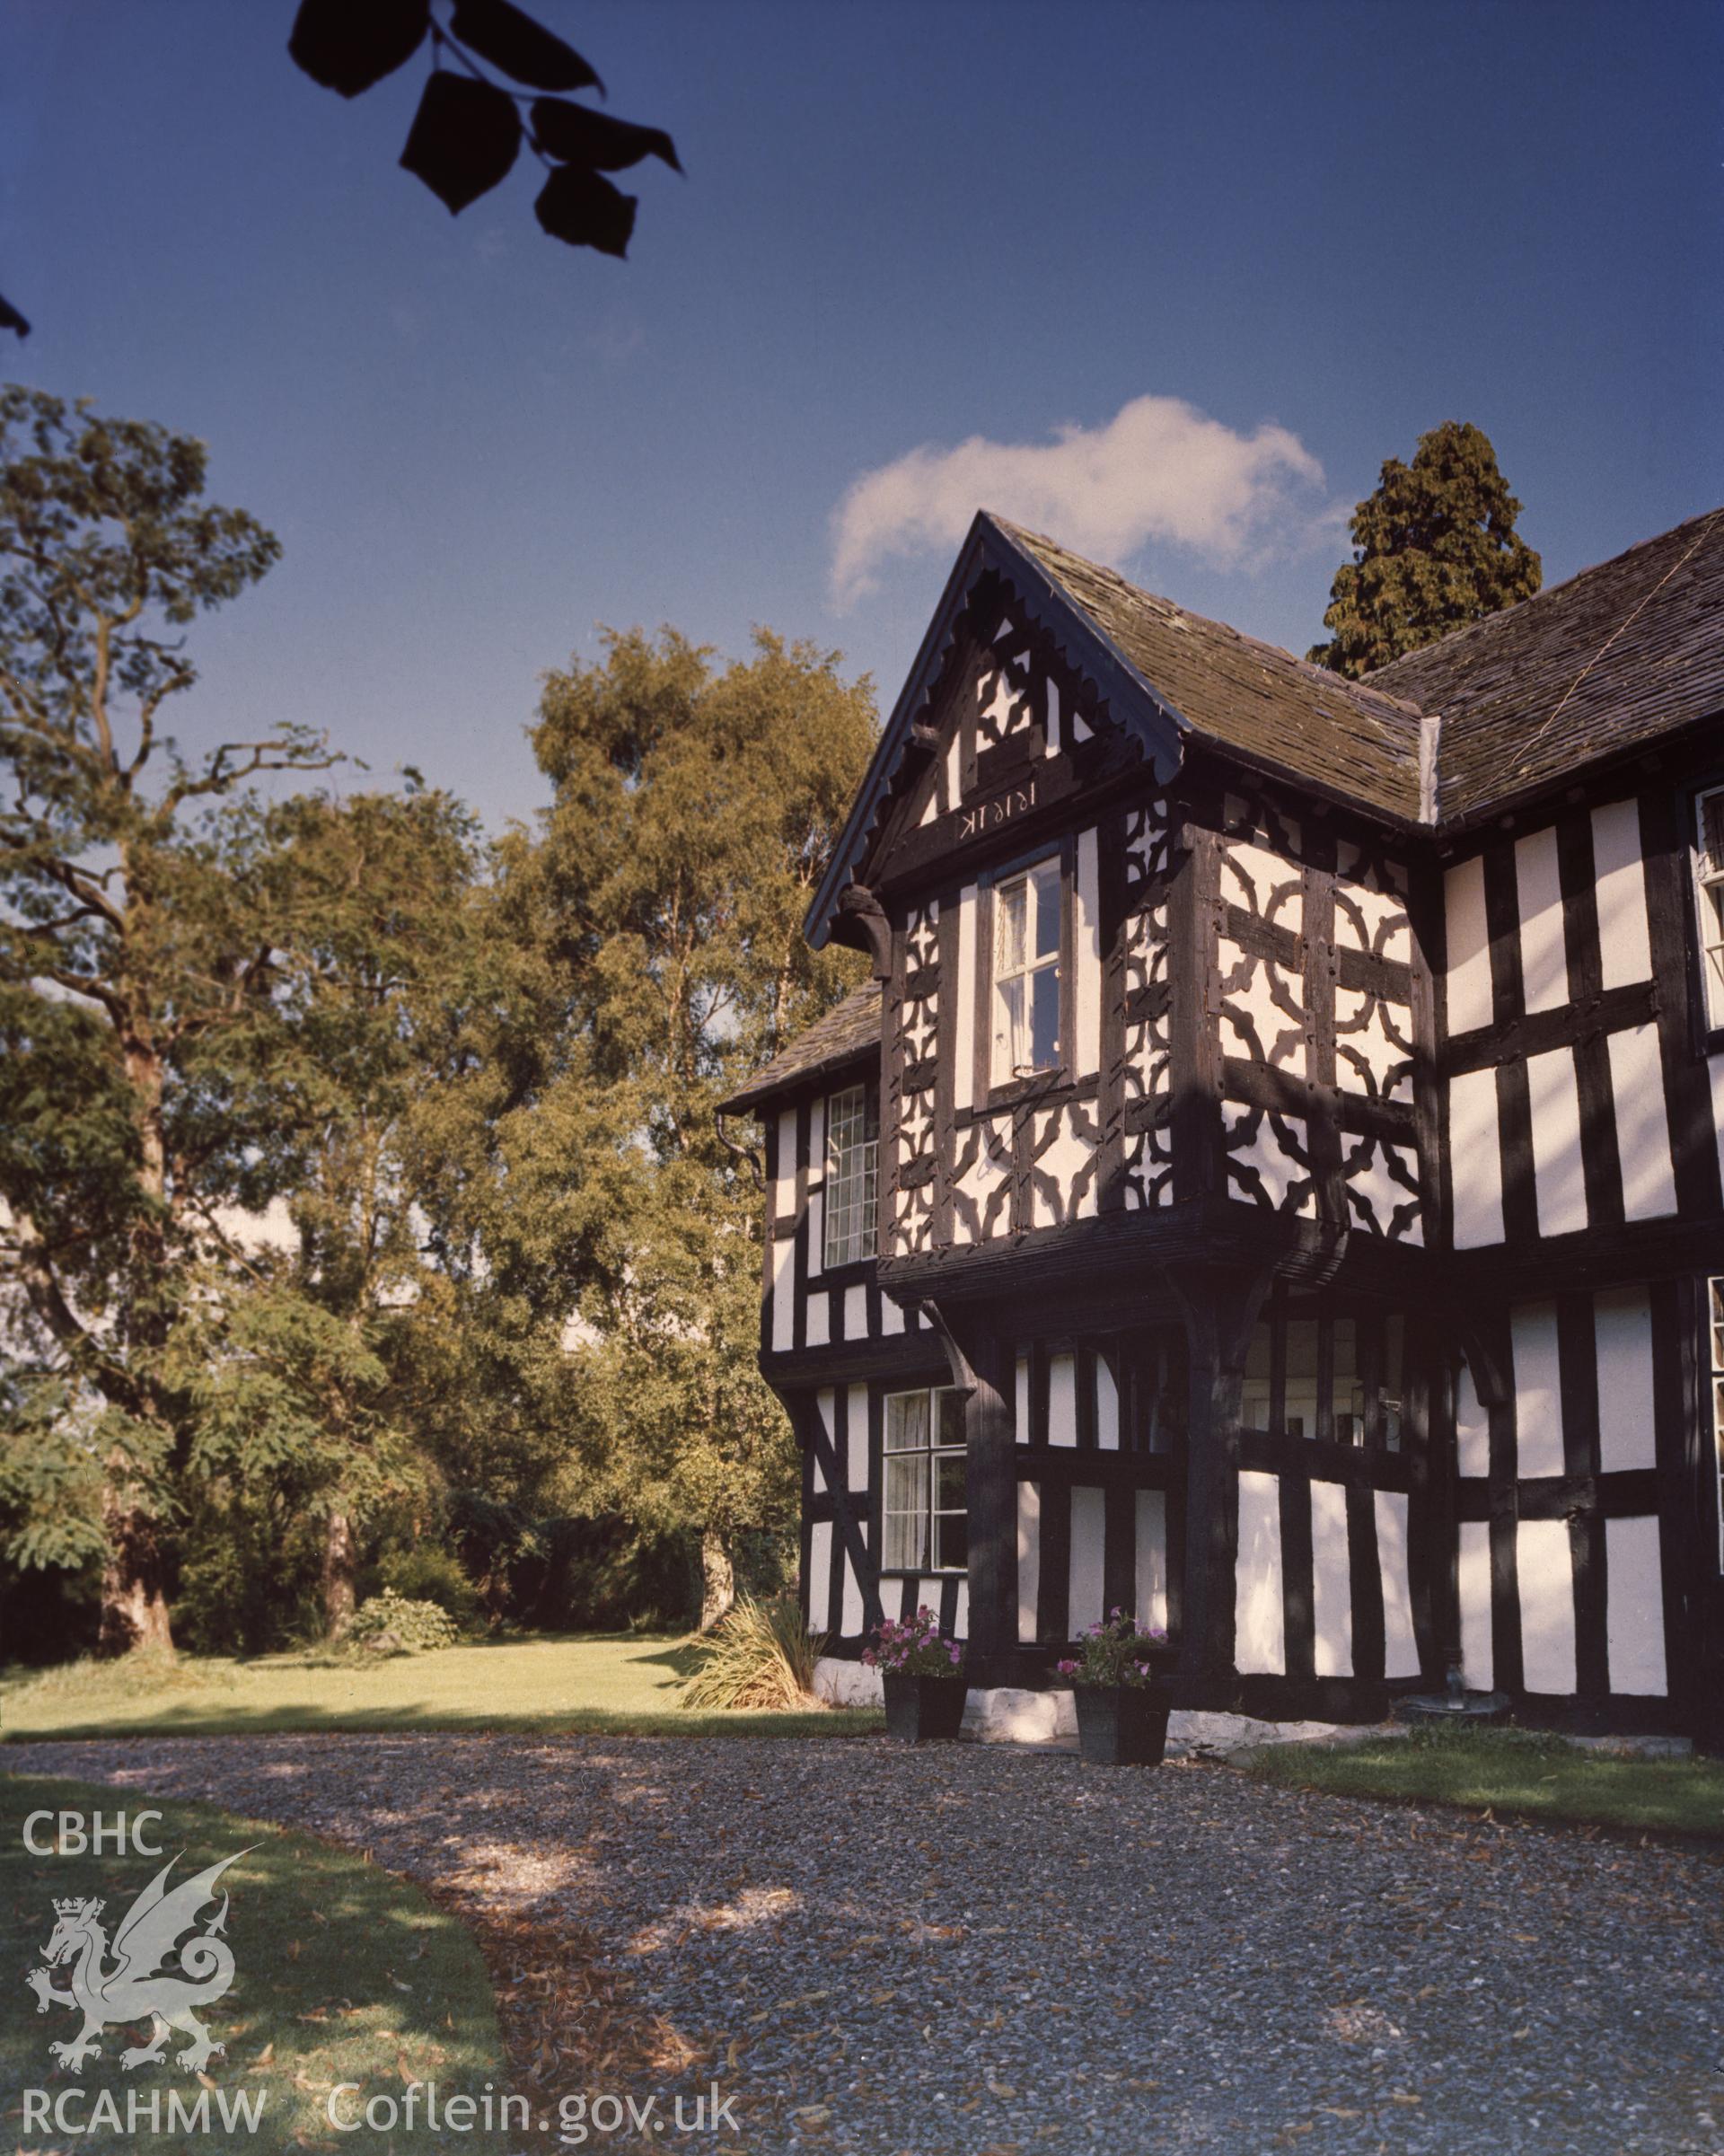 RCAHMW colour transparency showing the Old Vicarage, Berriew, taken by R.G. Nicol, undated.